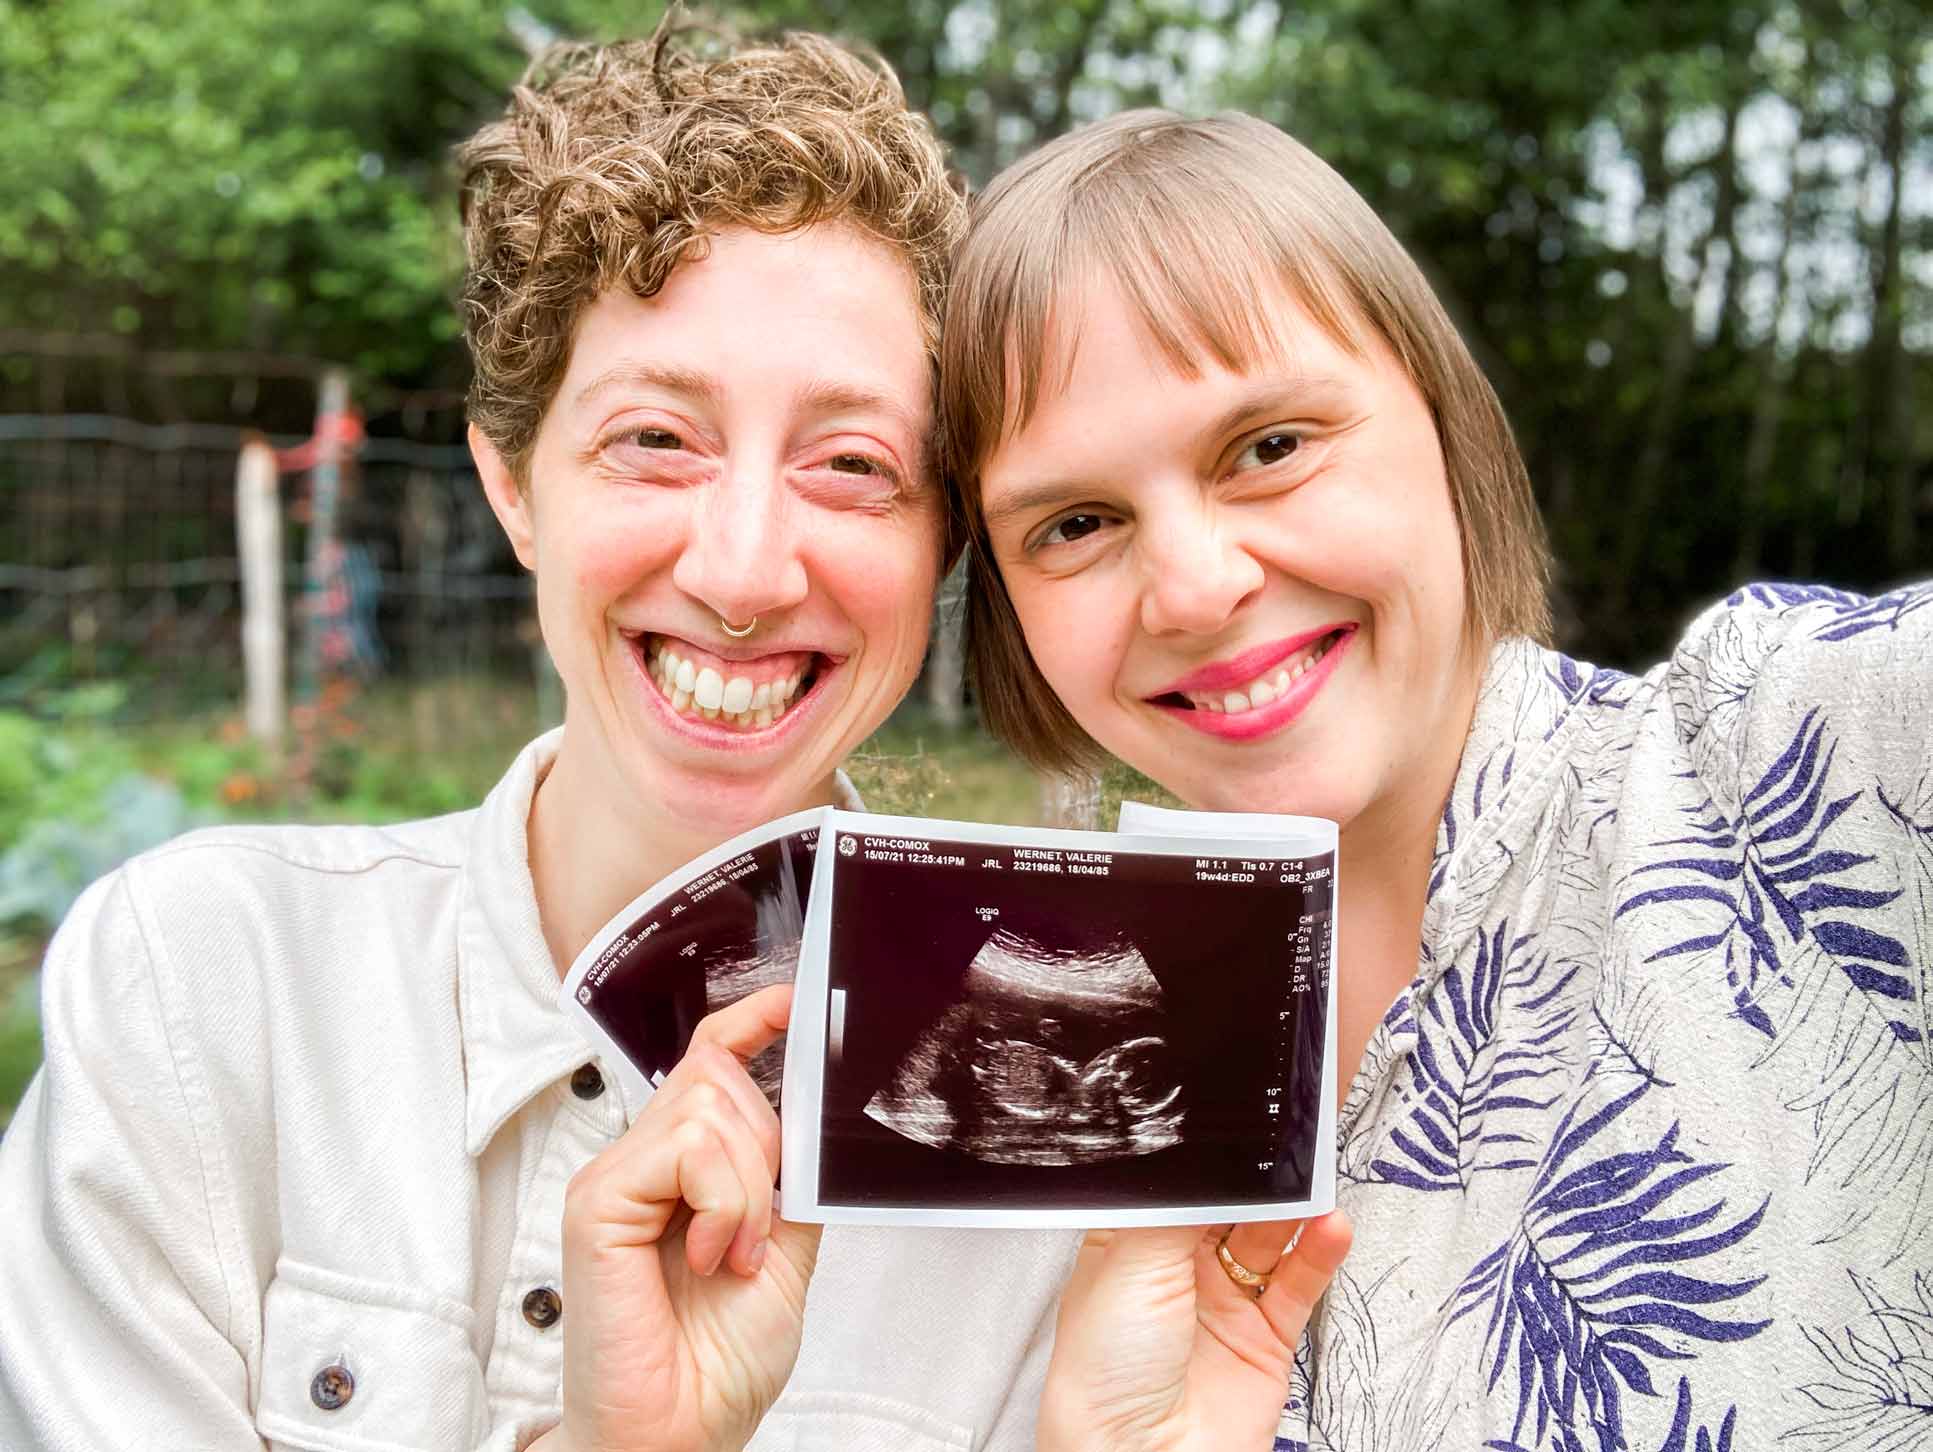 Two smiling women happily holds up their sonogram photo announcing they are pregnant.